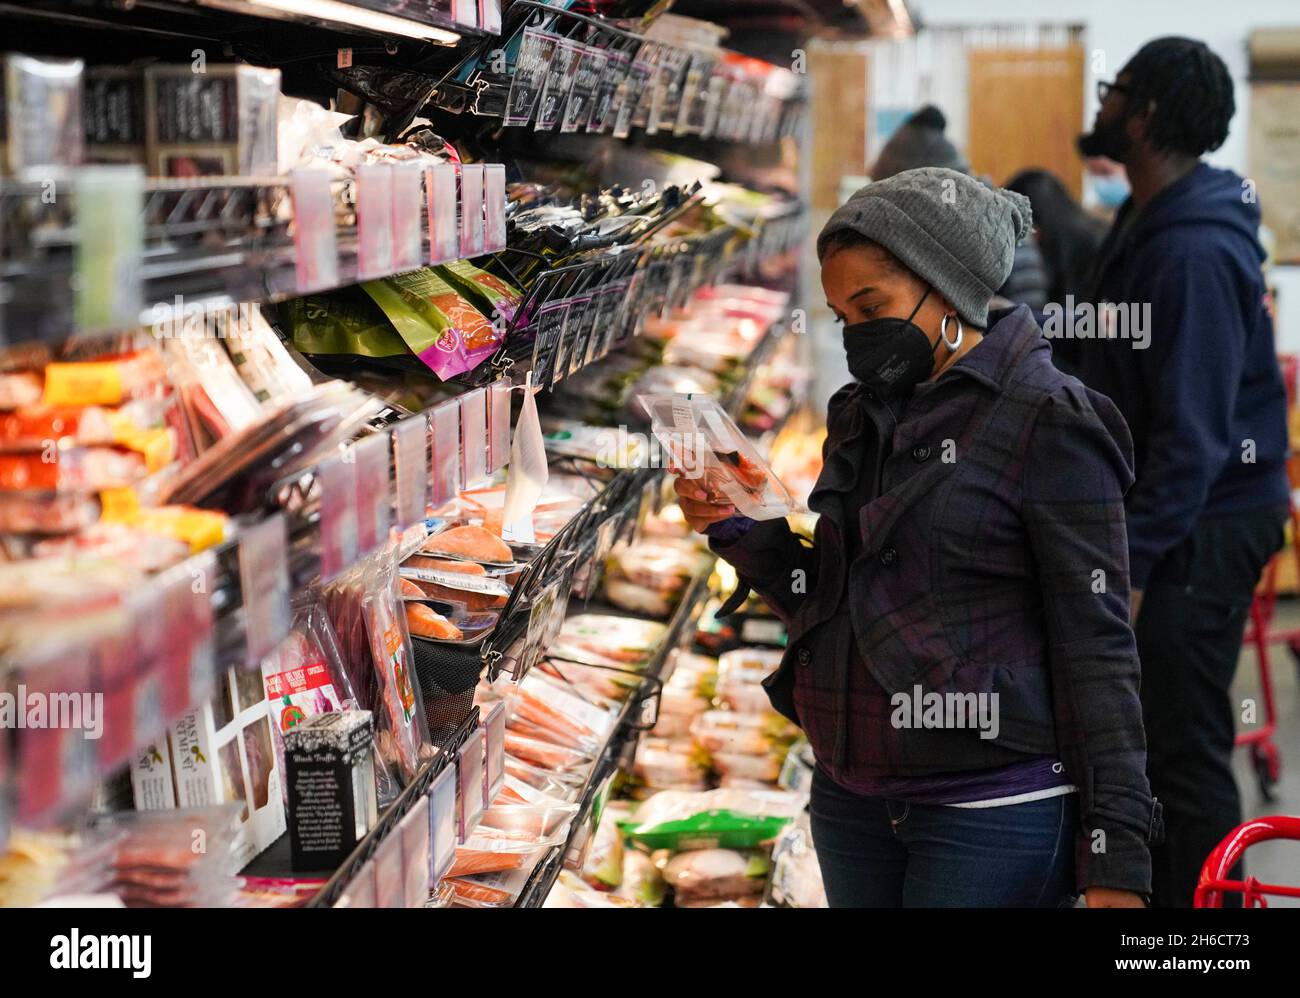 New York, USA. 14th Nov, 2021. People select fish products at a